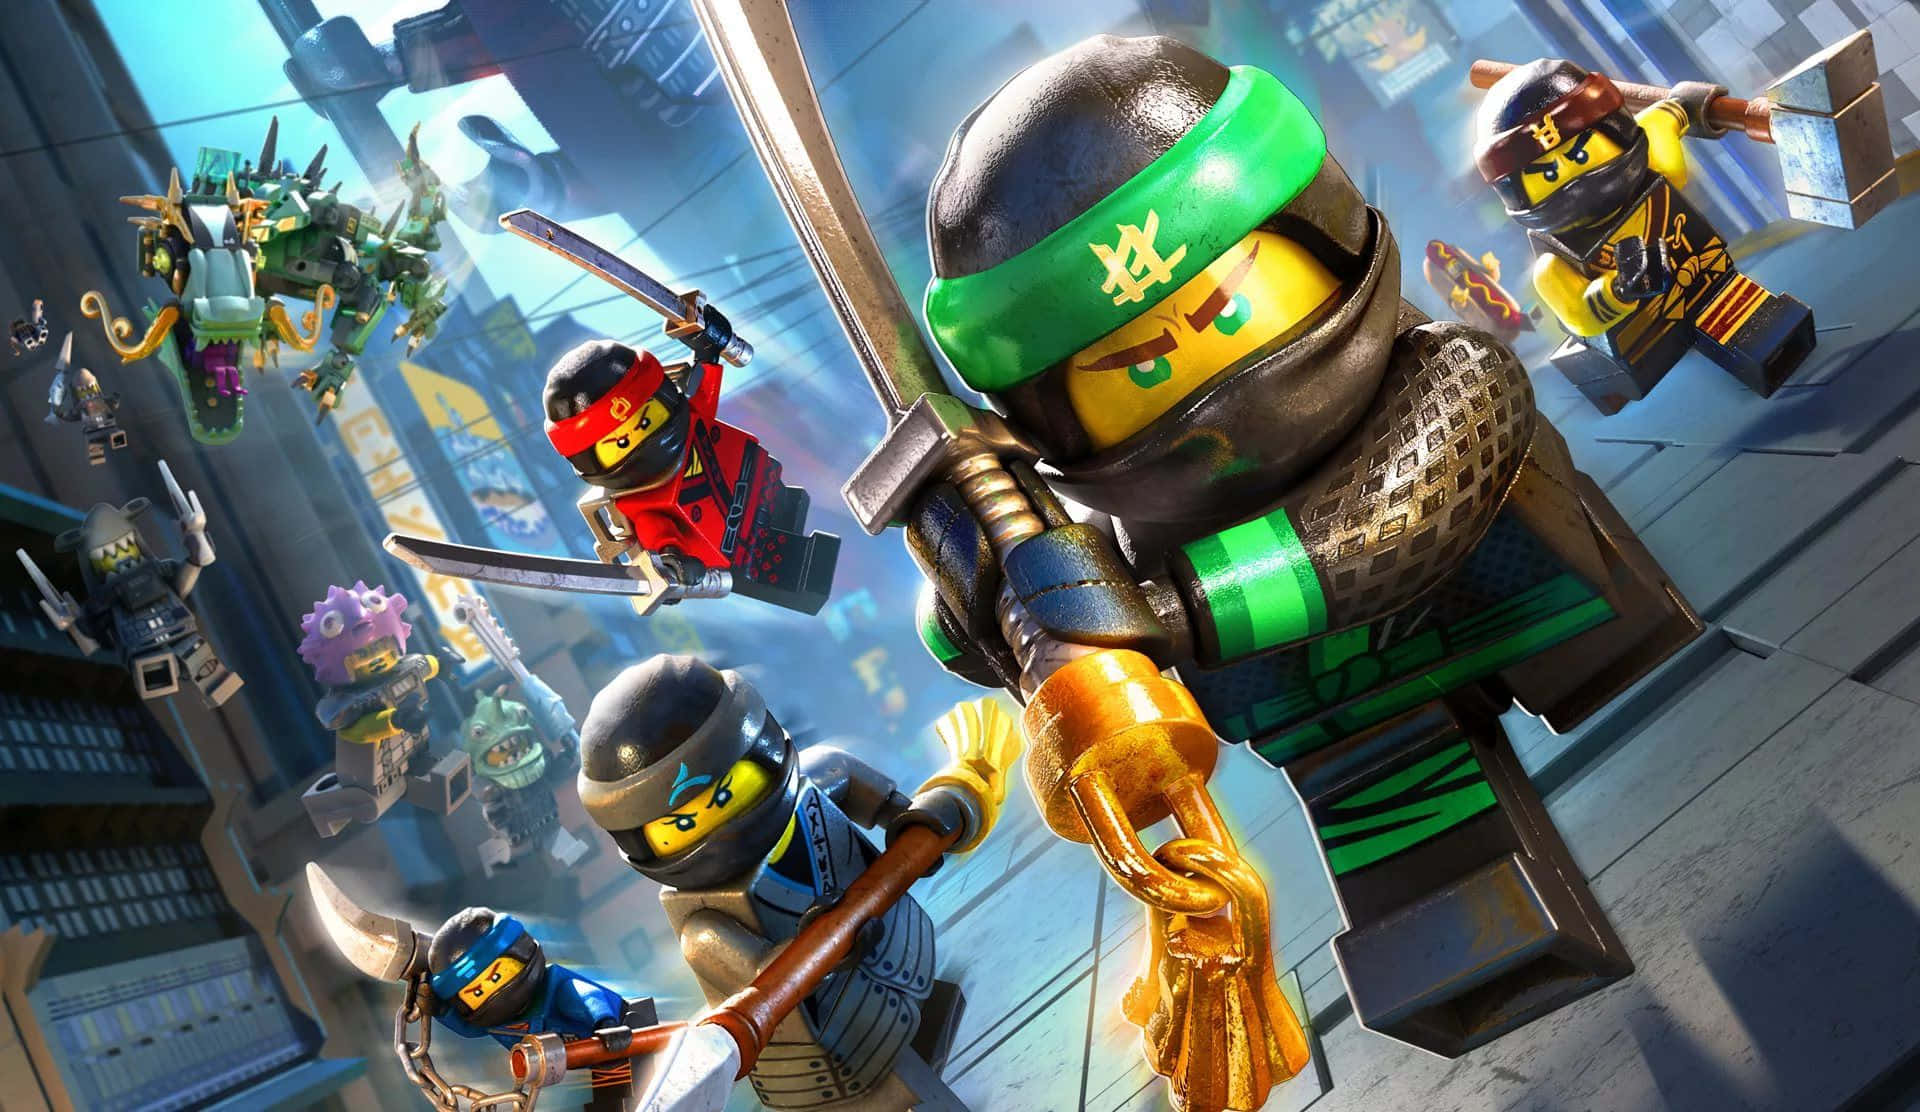 The Ninjago heroes assembled for battle